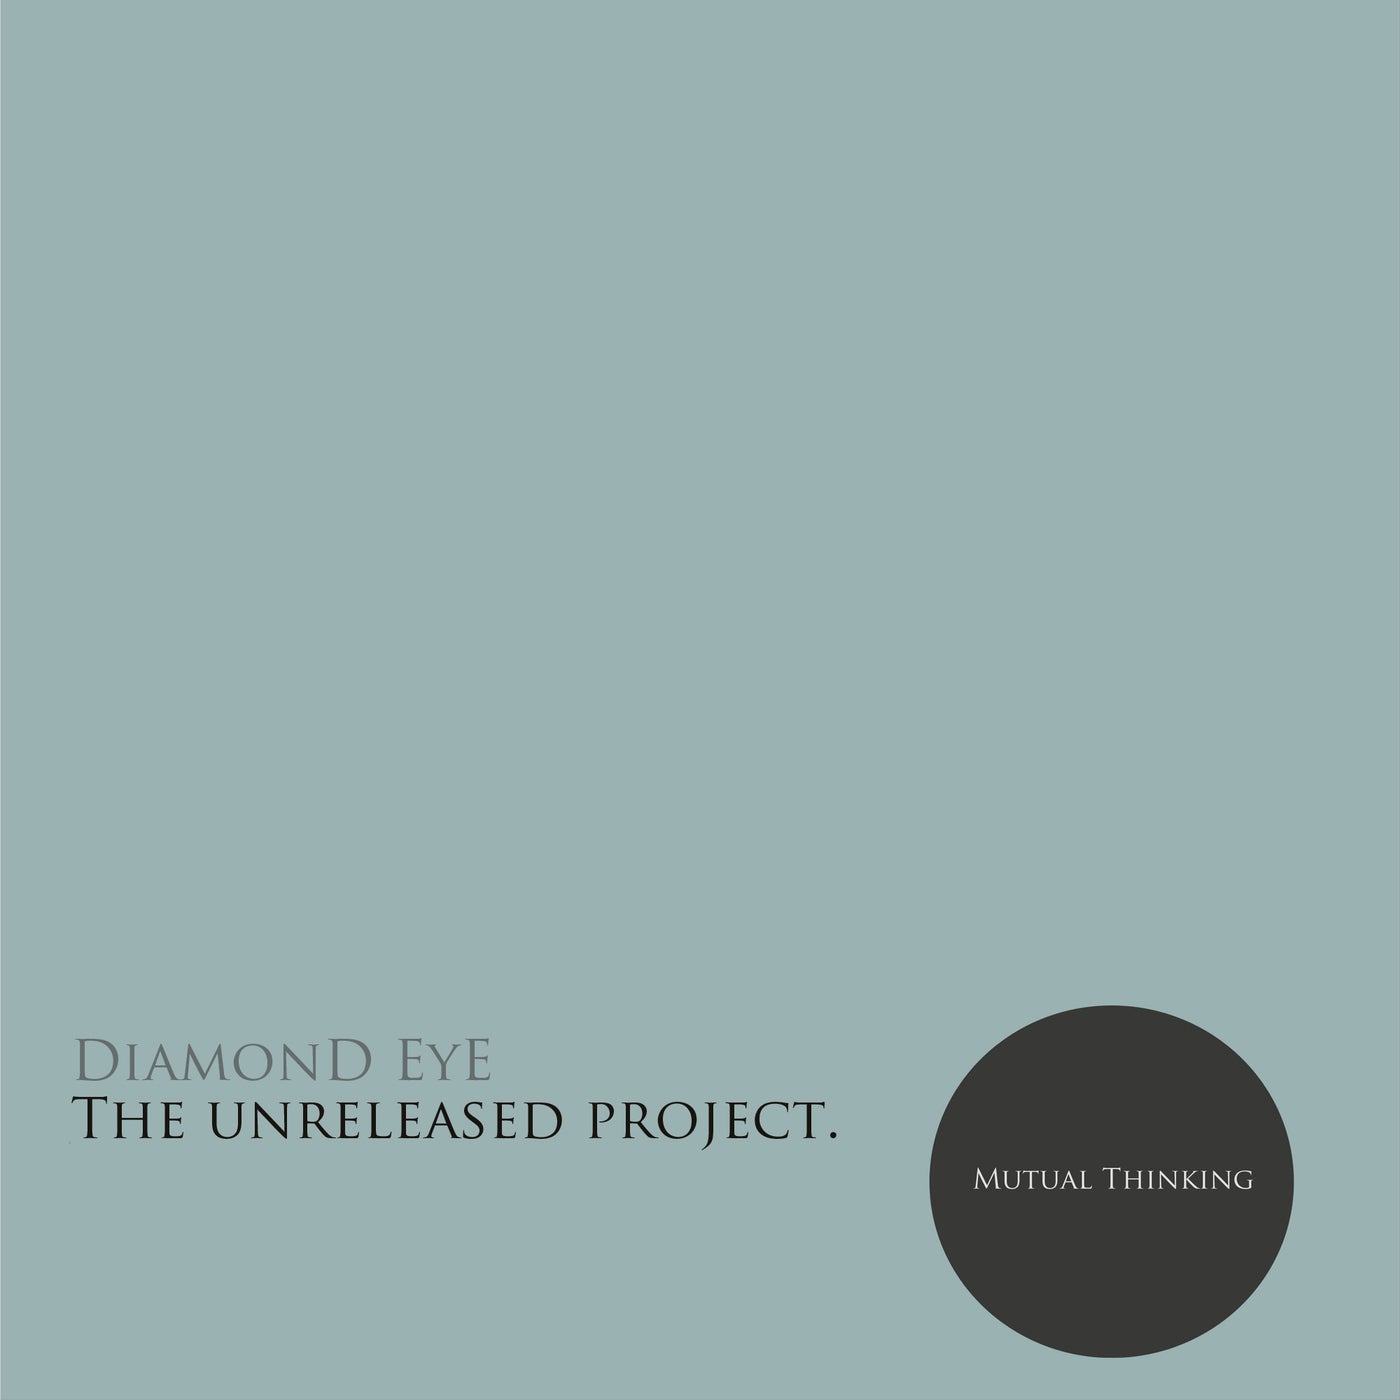 The Unreleased Project